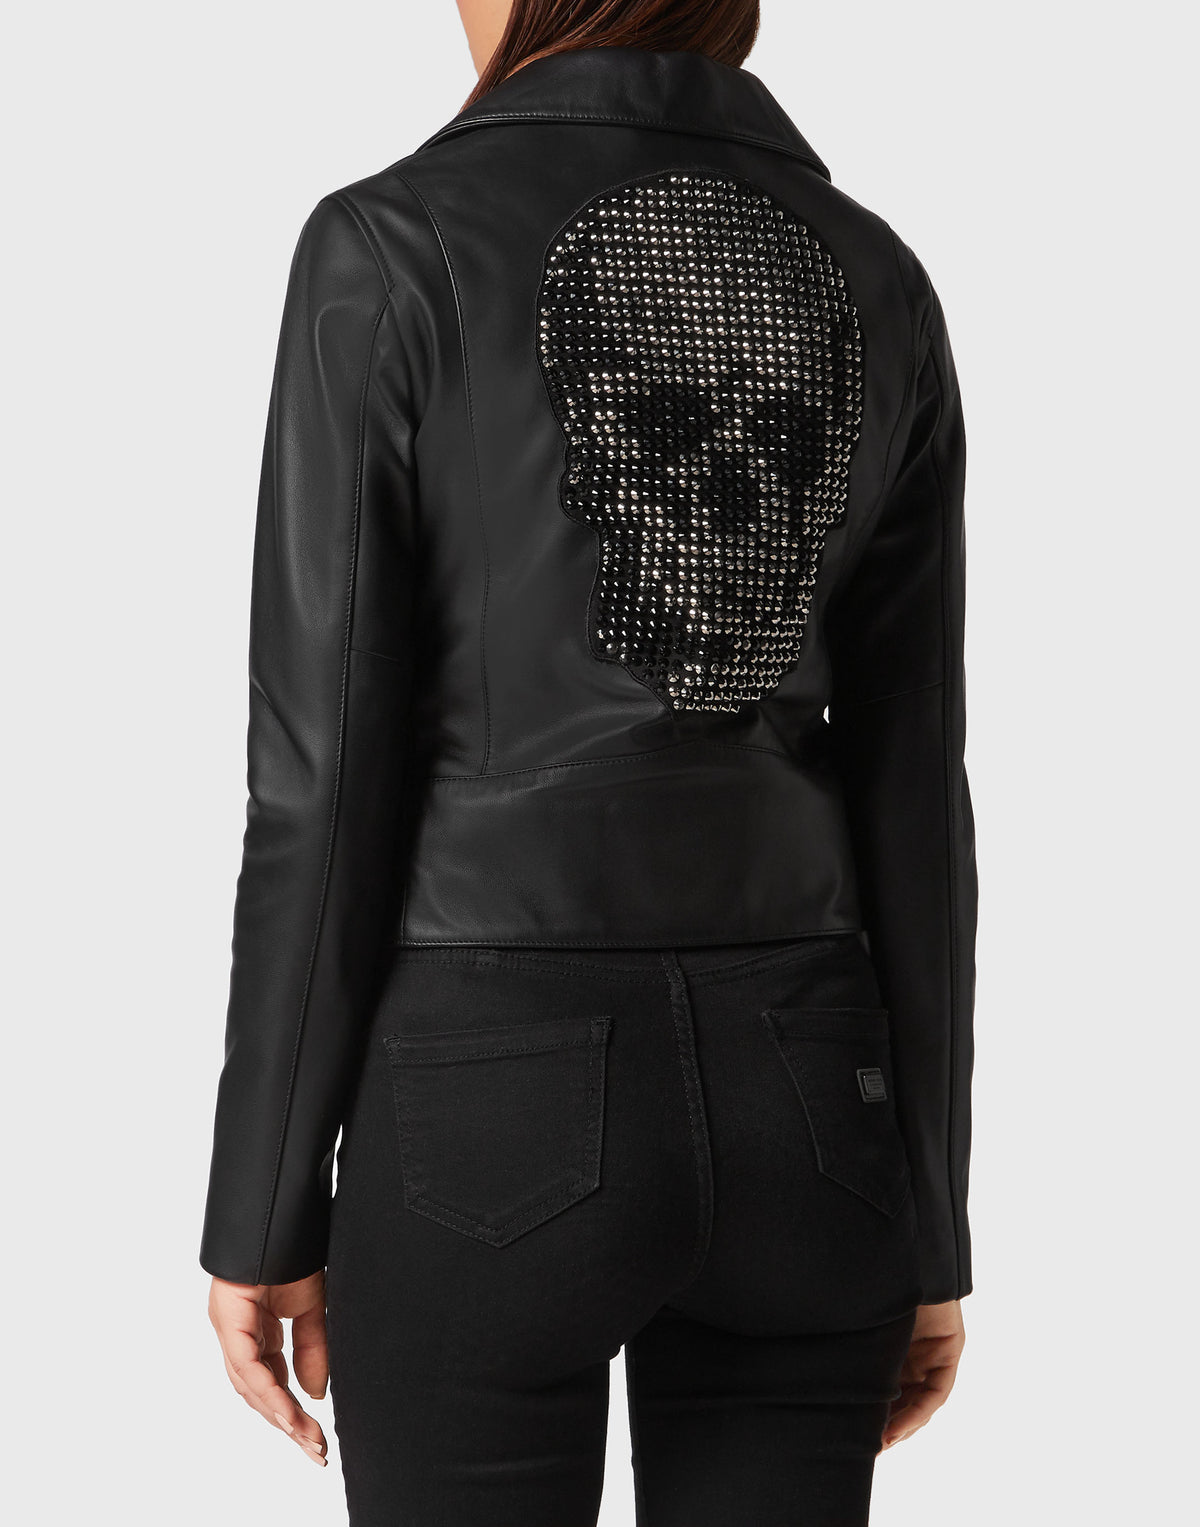 Leather Boxy Biker Jacket with Crystals black